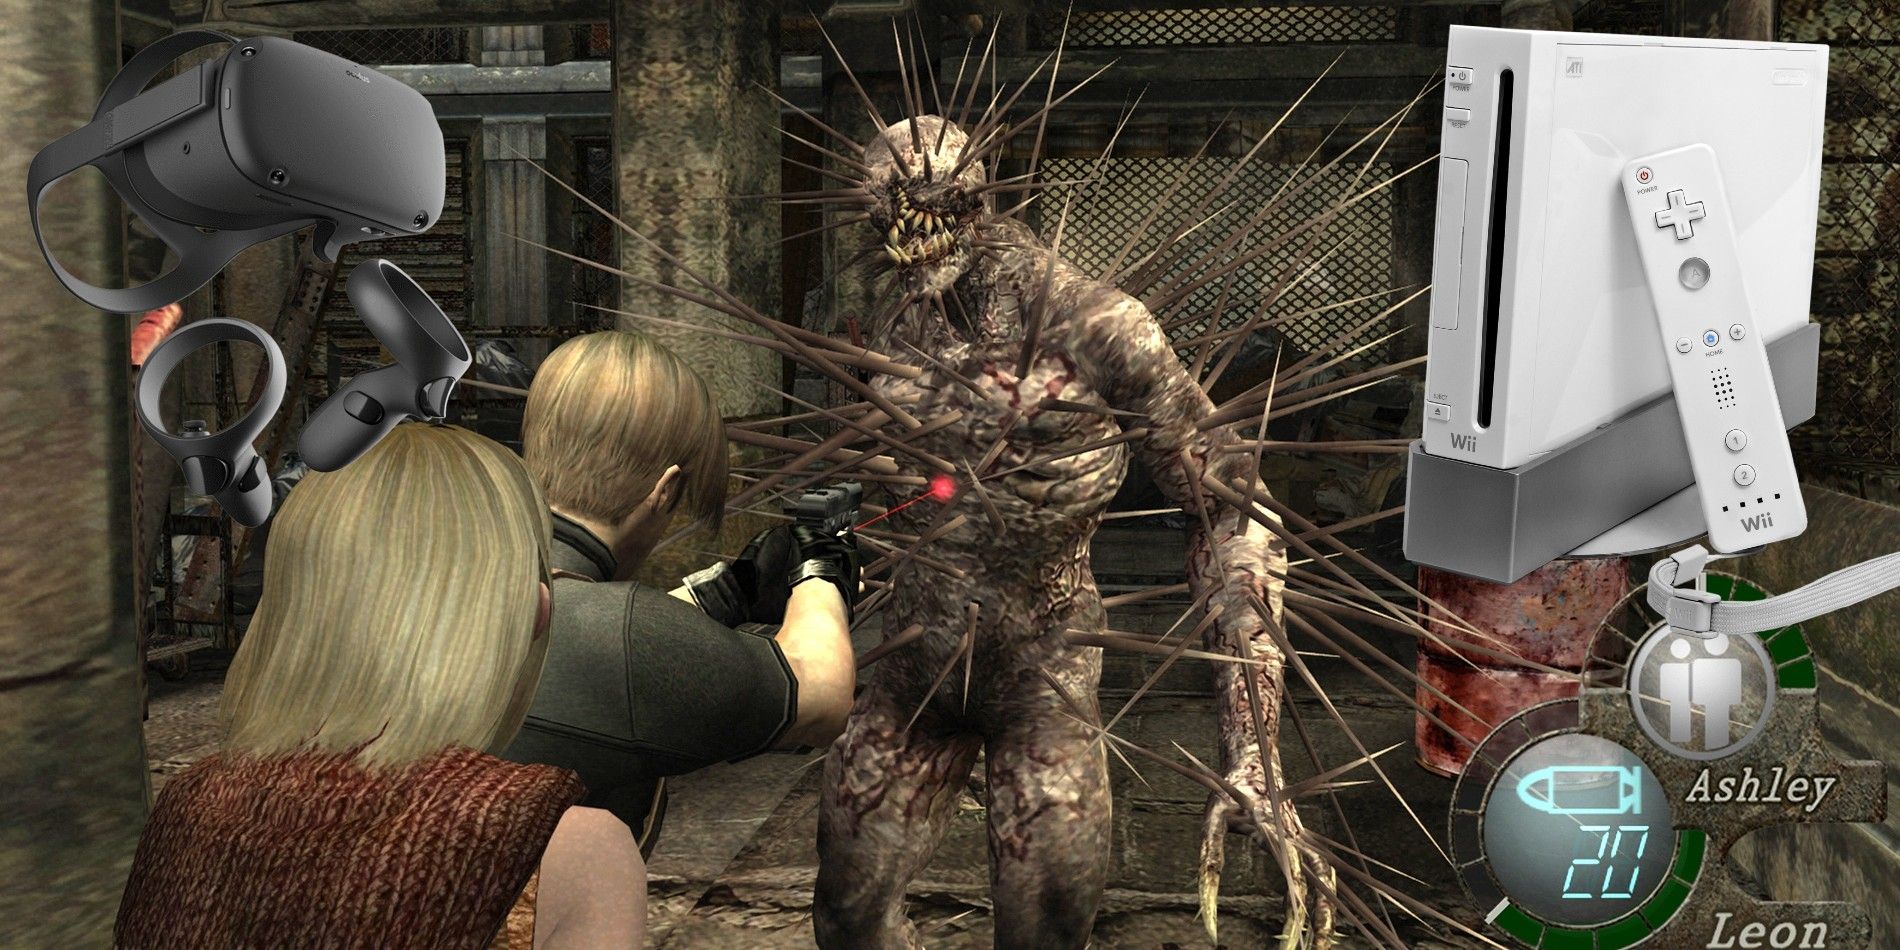 How Resident Evil 4 VR Channels RE4s Beloved Wii Edition